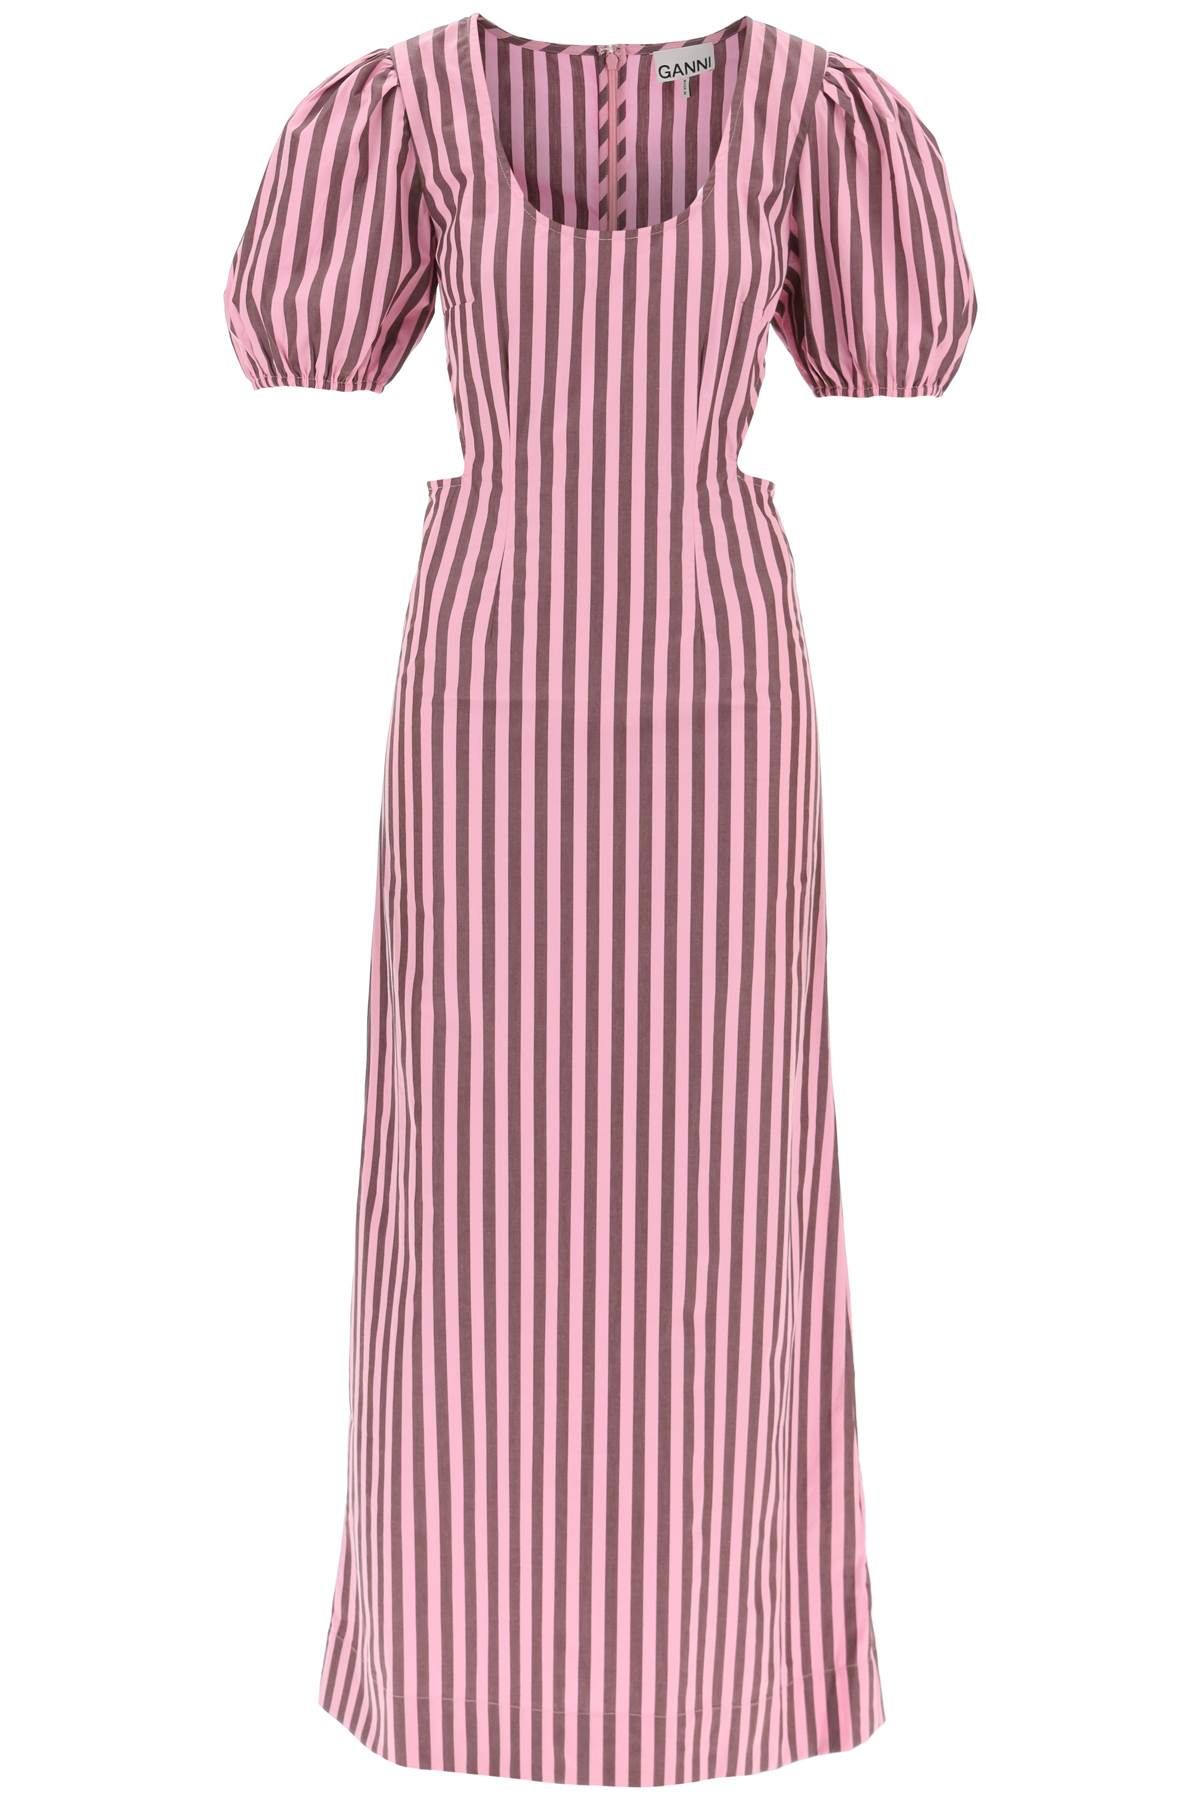 Ganni Striped Maxi Dress With Cut-outs In Pink,brown